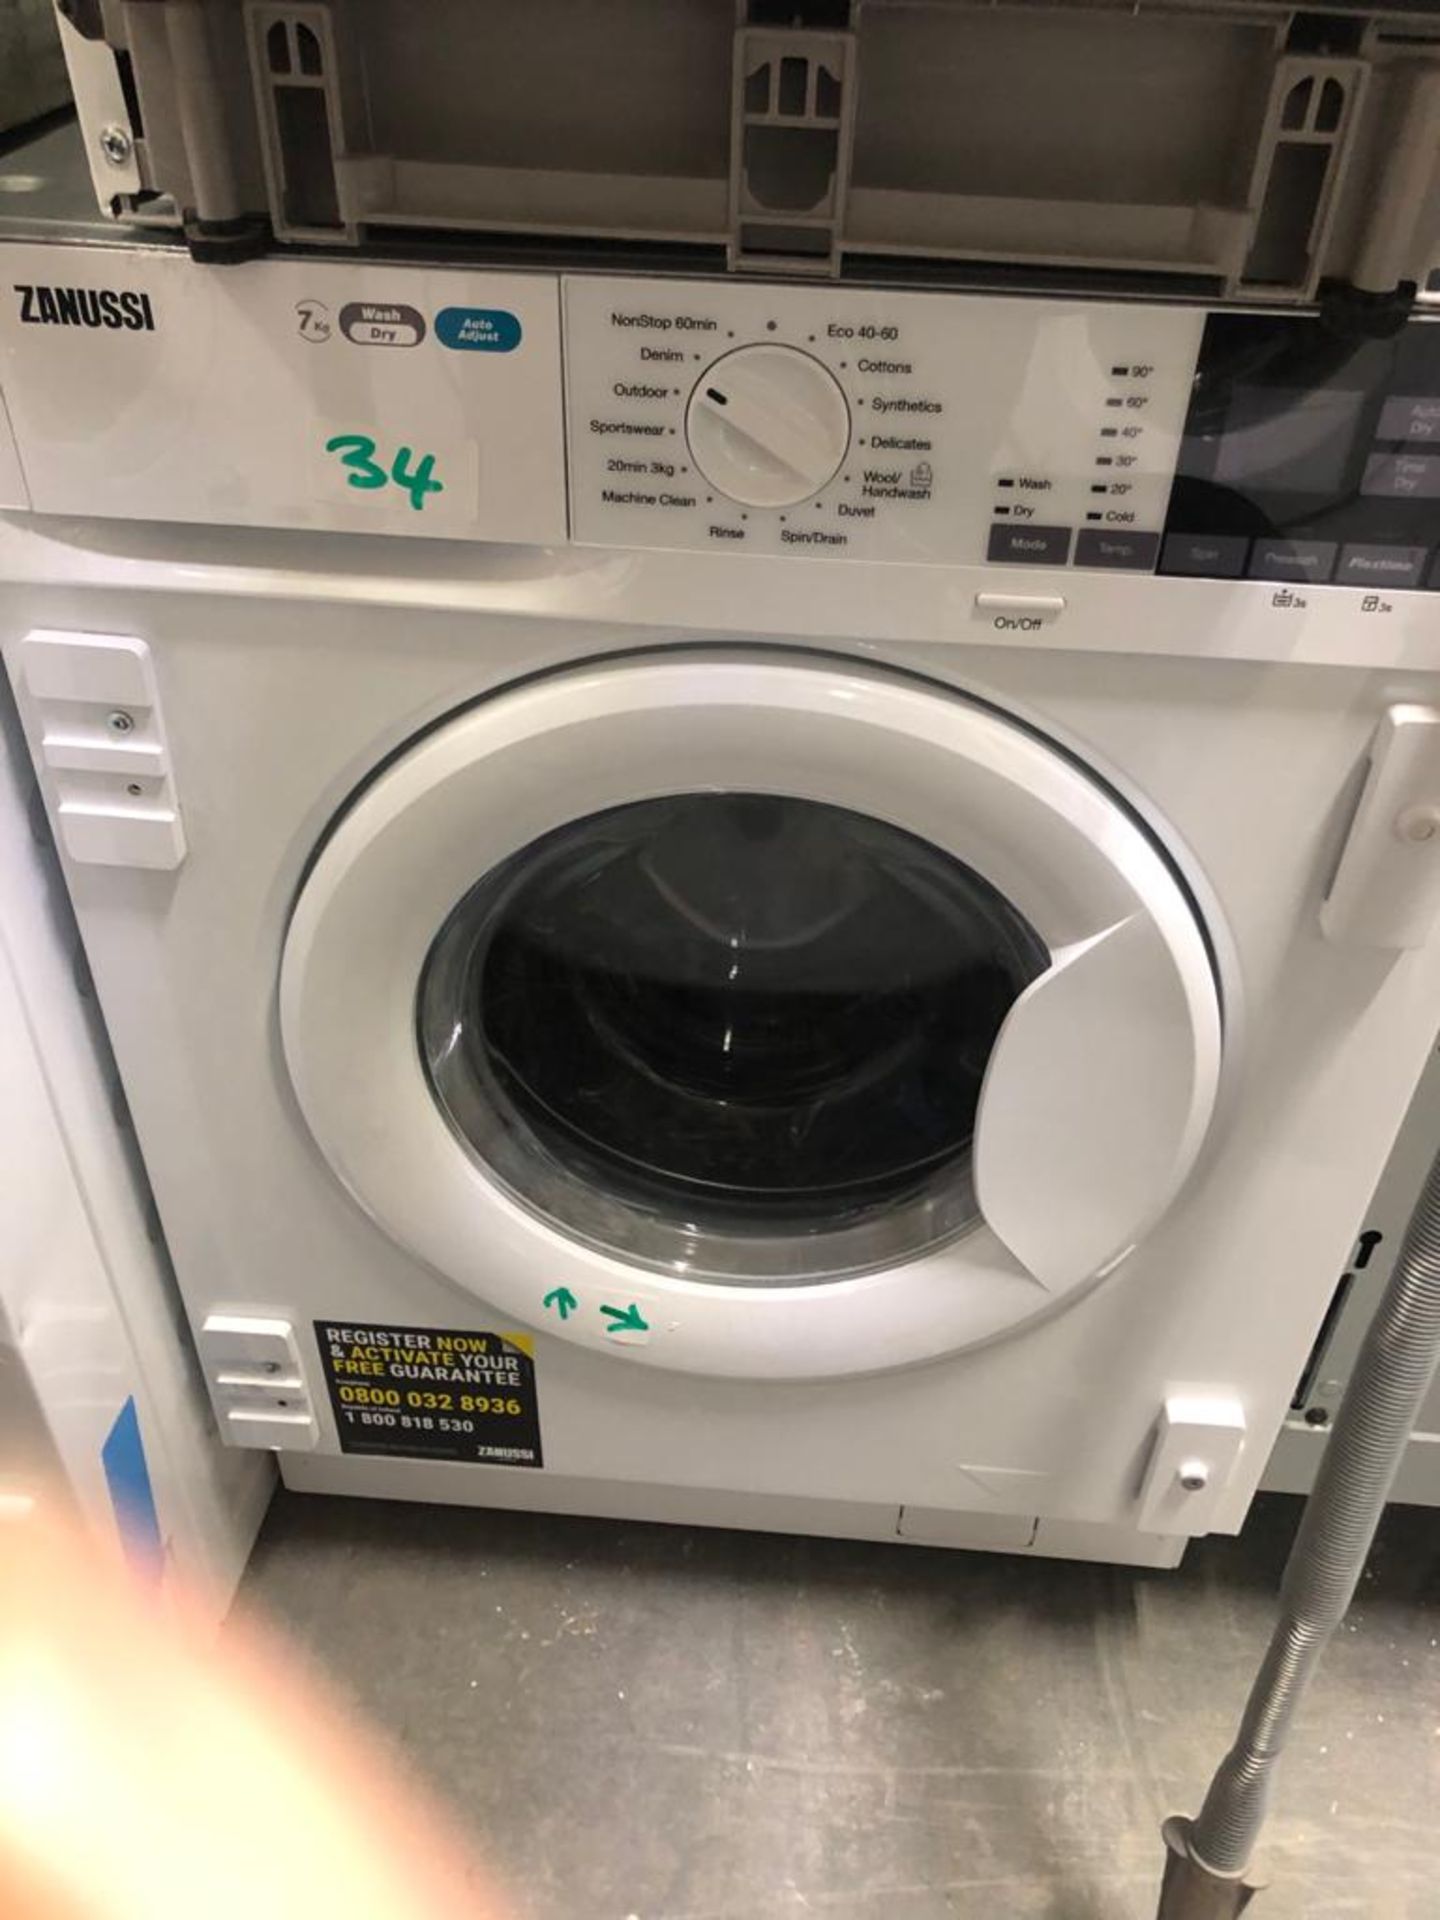 NEW/GRADED AND UNPACKAGED Zanussi Z716WT83BI Integrated washer dryer (Scuffs on the front door